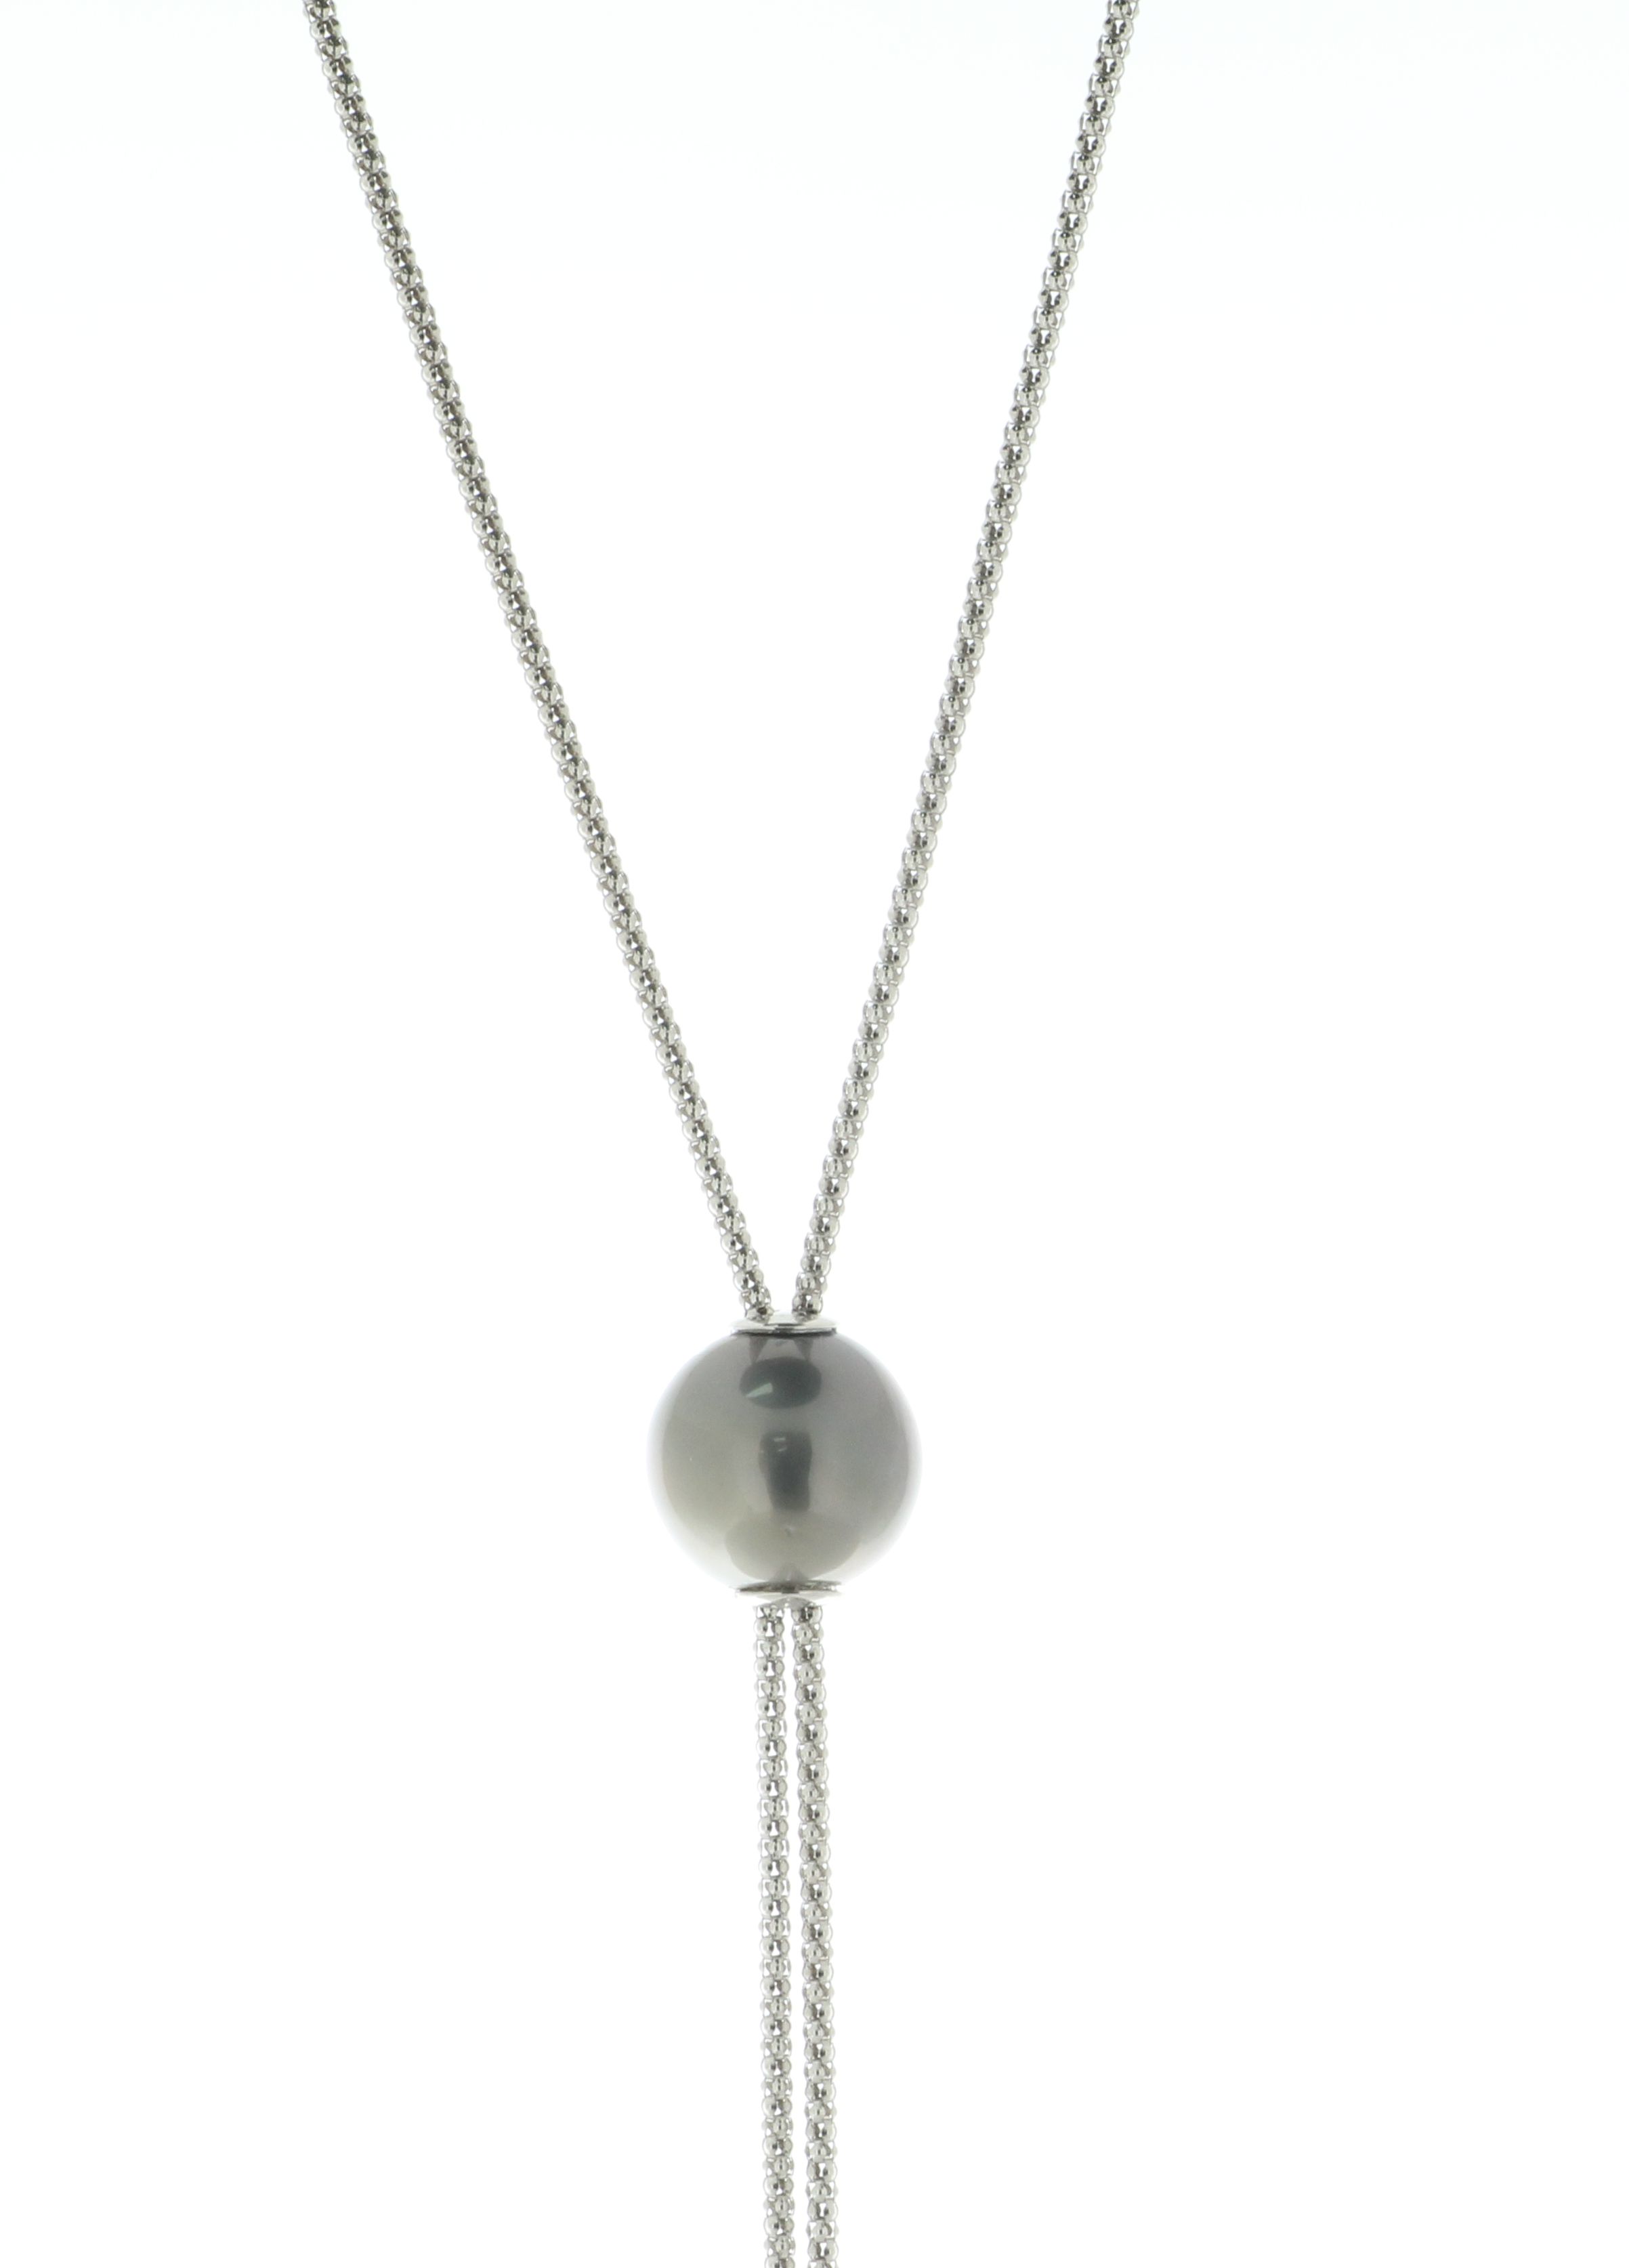 14mm Tahiti Pearl Necklace Moveable Pearl Sterling Silver Chain - Image 4 of 7